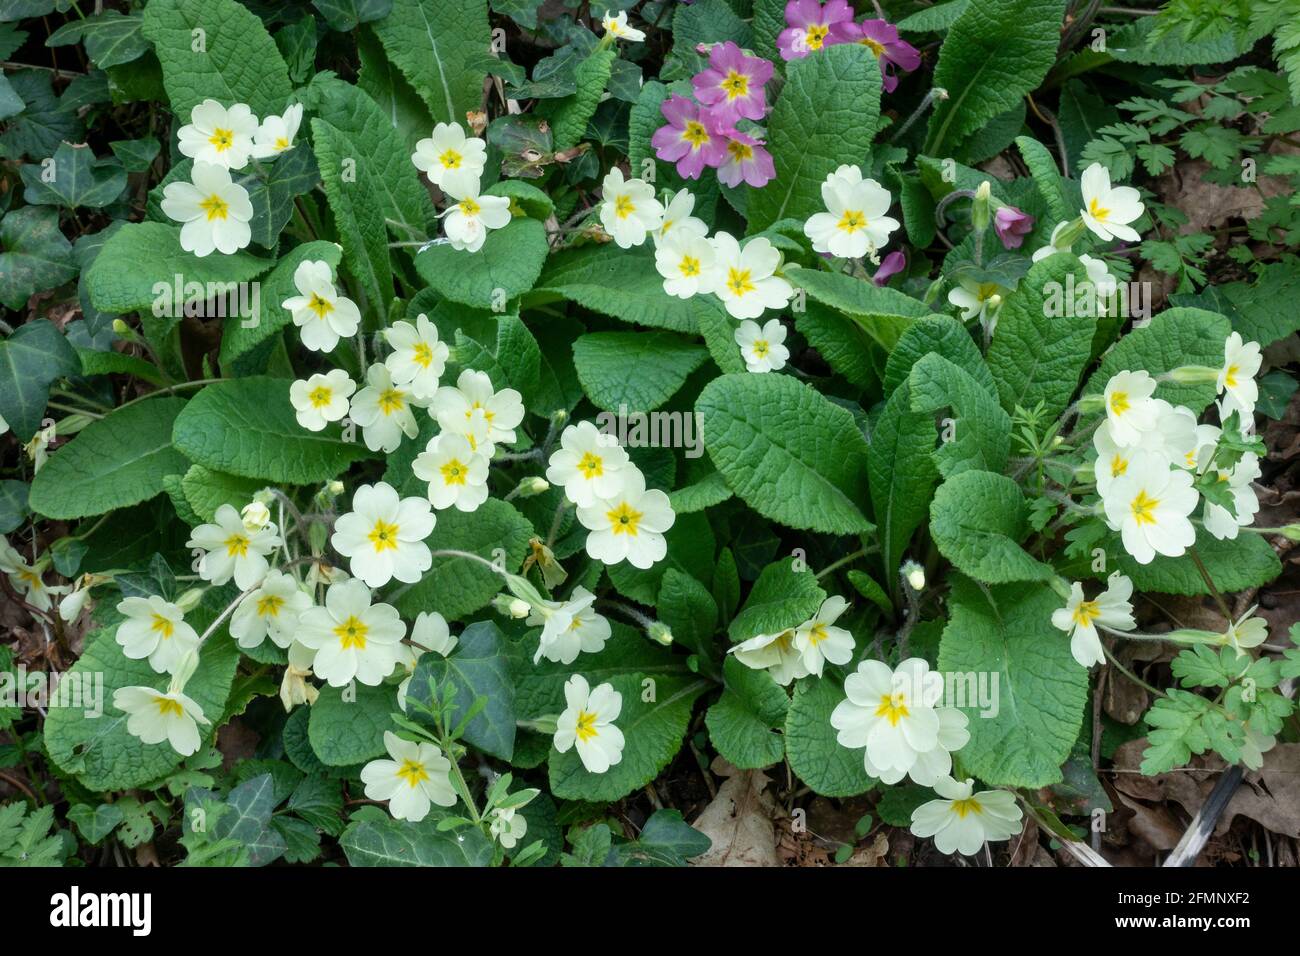 Bunches of wild primroses (Primula vulgaris) growing in woodland in springtime Stock Photo